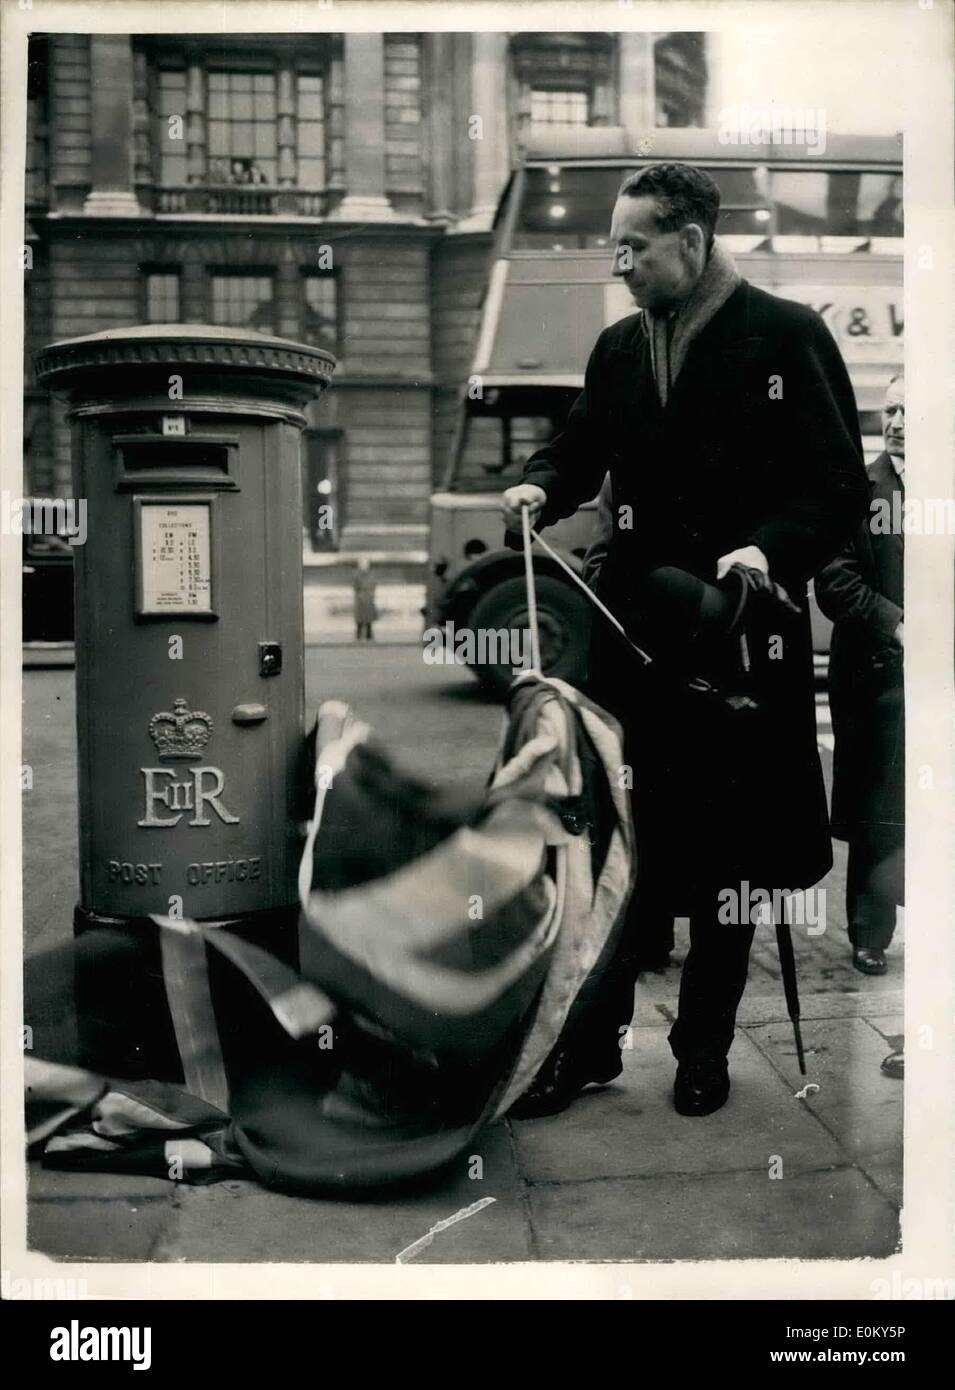 Nov. 11, 1952 - First G.P.O. Pillar Box With ''E.R.'' Cypher Unveiled In London; The Earl of Selkirk, O.B.E., Parliamentary Secretary to the Postmasters General -this afternoon unveiled the first G.P.O. pillar box which bears the new Royal Cypher E.R. - on the White hell side of the Horse Guards Parade. Photo Shows The Earl Of Selkirk unveiling the new cypher on the pillar box today Stock Photo